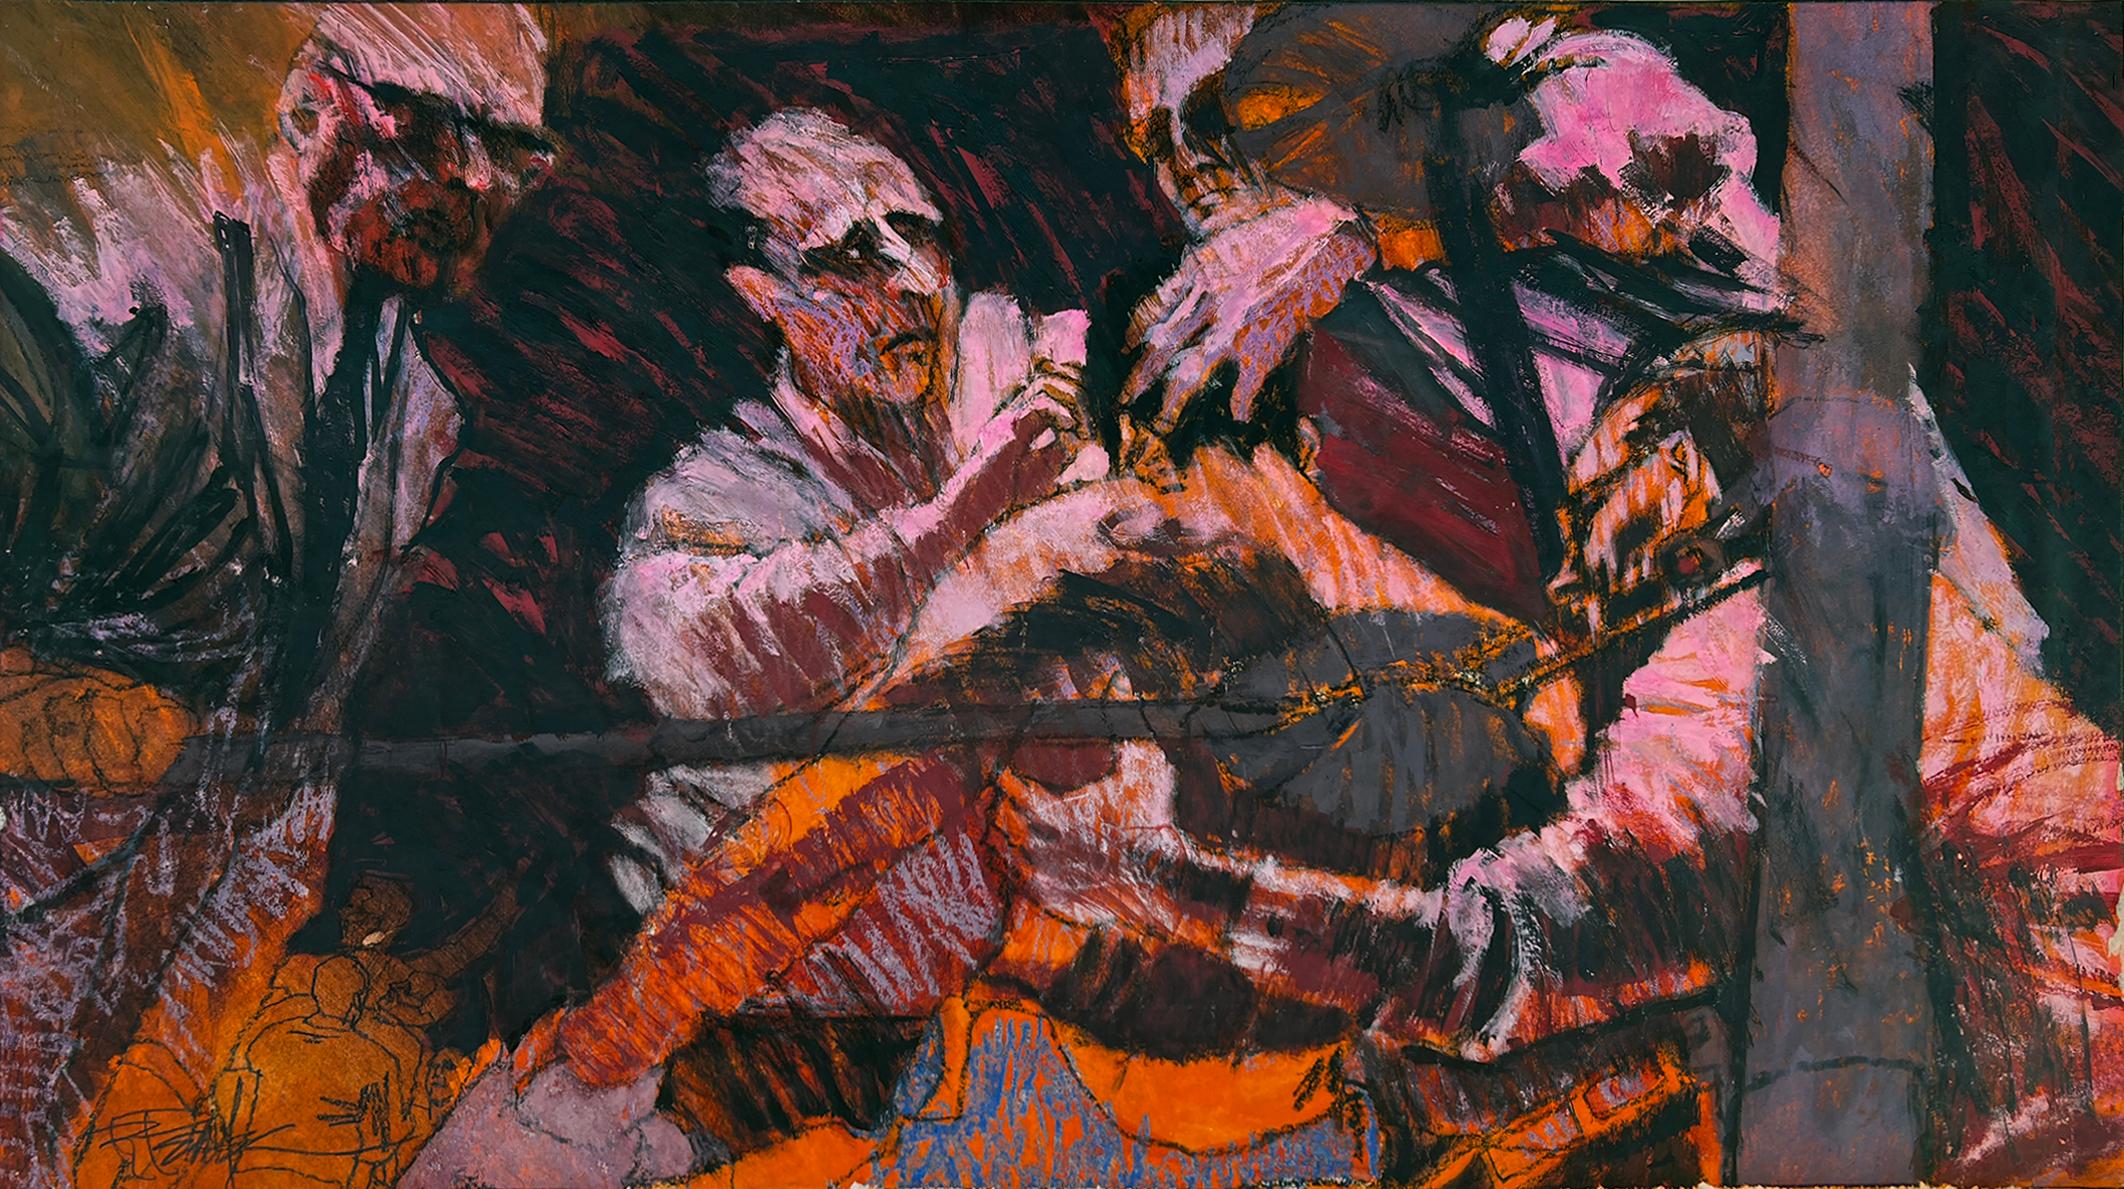 Bob Peak Figurative Painting - Boxing Scene. Vanquished Boxer in his Corner. Sports Illustrated Boxing Story